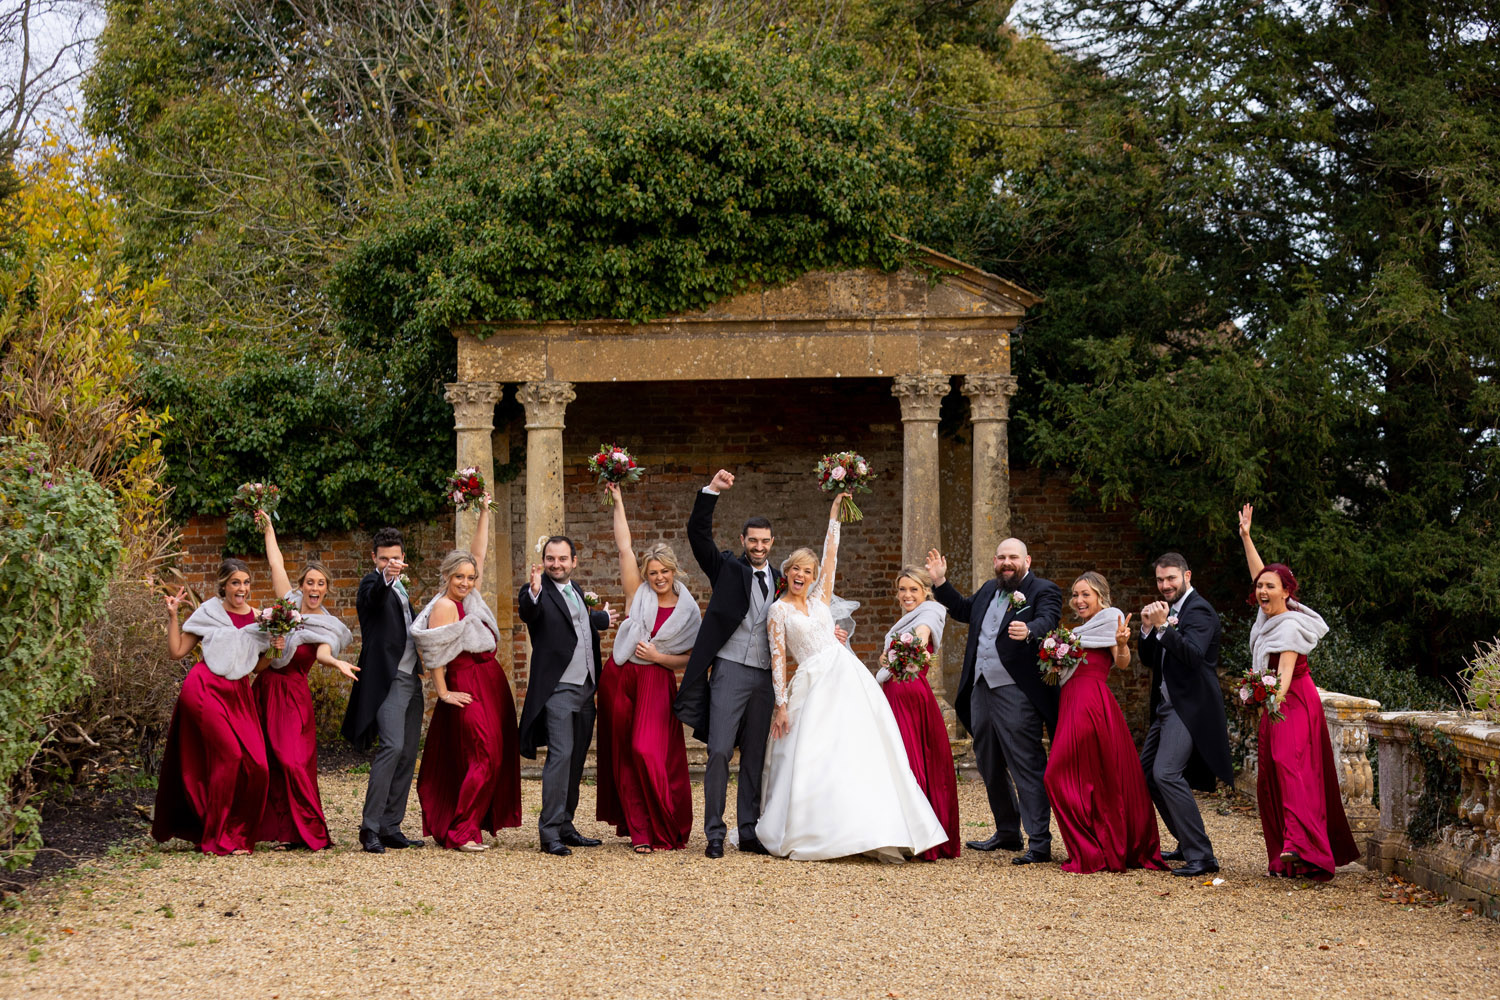 A wedding group shot with 12 people including the bride and groom, bridesmaids in dark red and the bride holding her bouquet high. By Martin Dabek, who's a Bristol wedding photographer